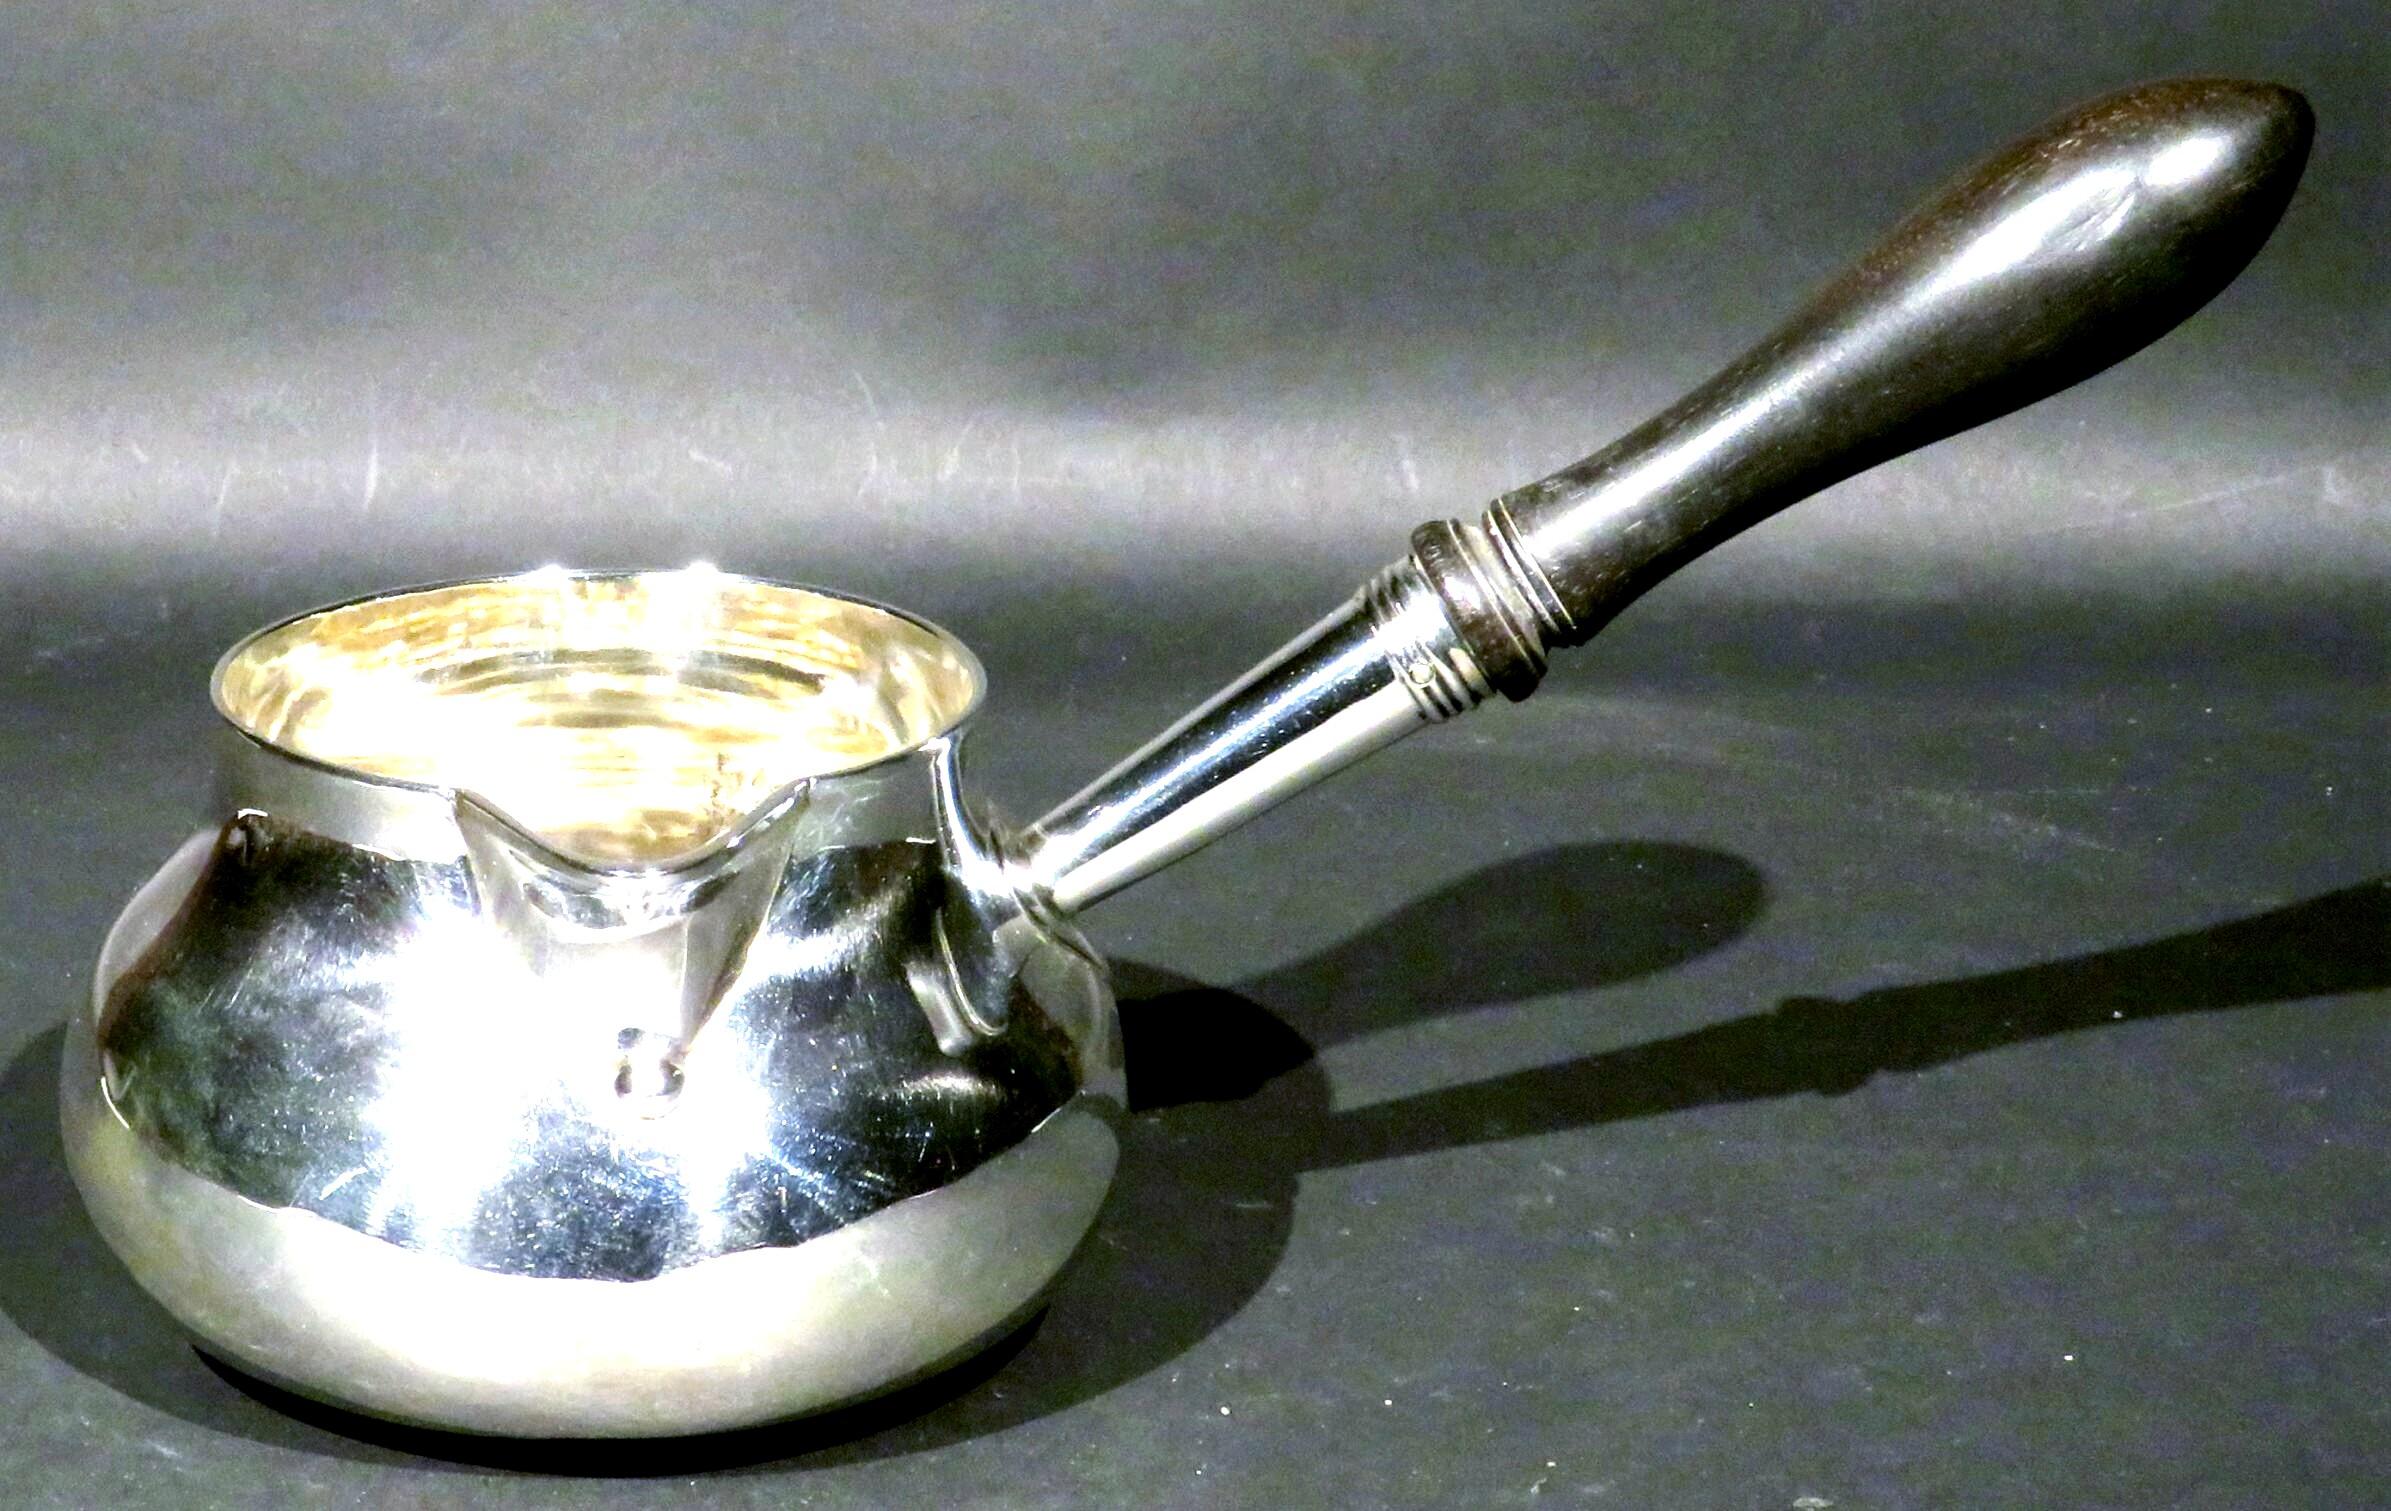 A very good Georgian sterling silver brandy warmer showing a substantial sized warming bowl with a lipped spout, fitted to its original turned ebonized hardwood handle, the underside of the bowl bearing London hallmarks and date marks for 1830,